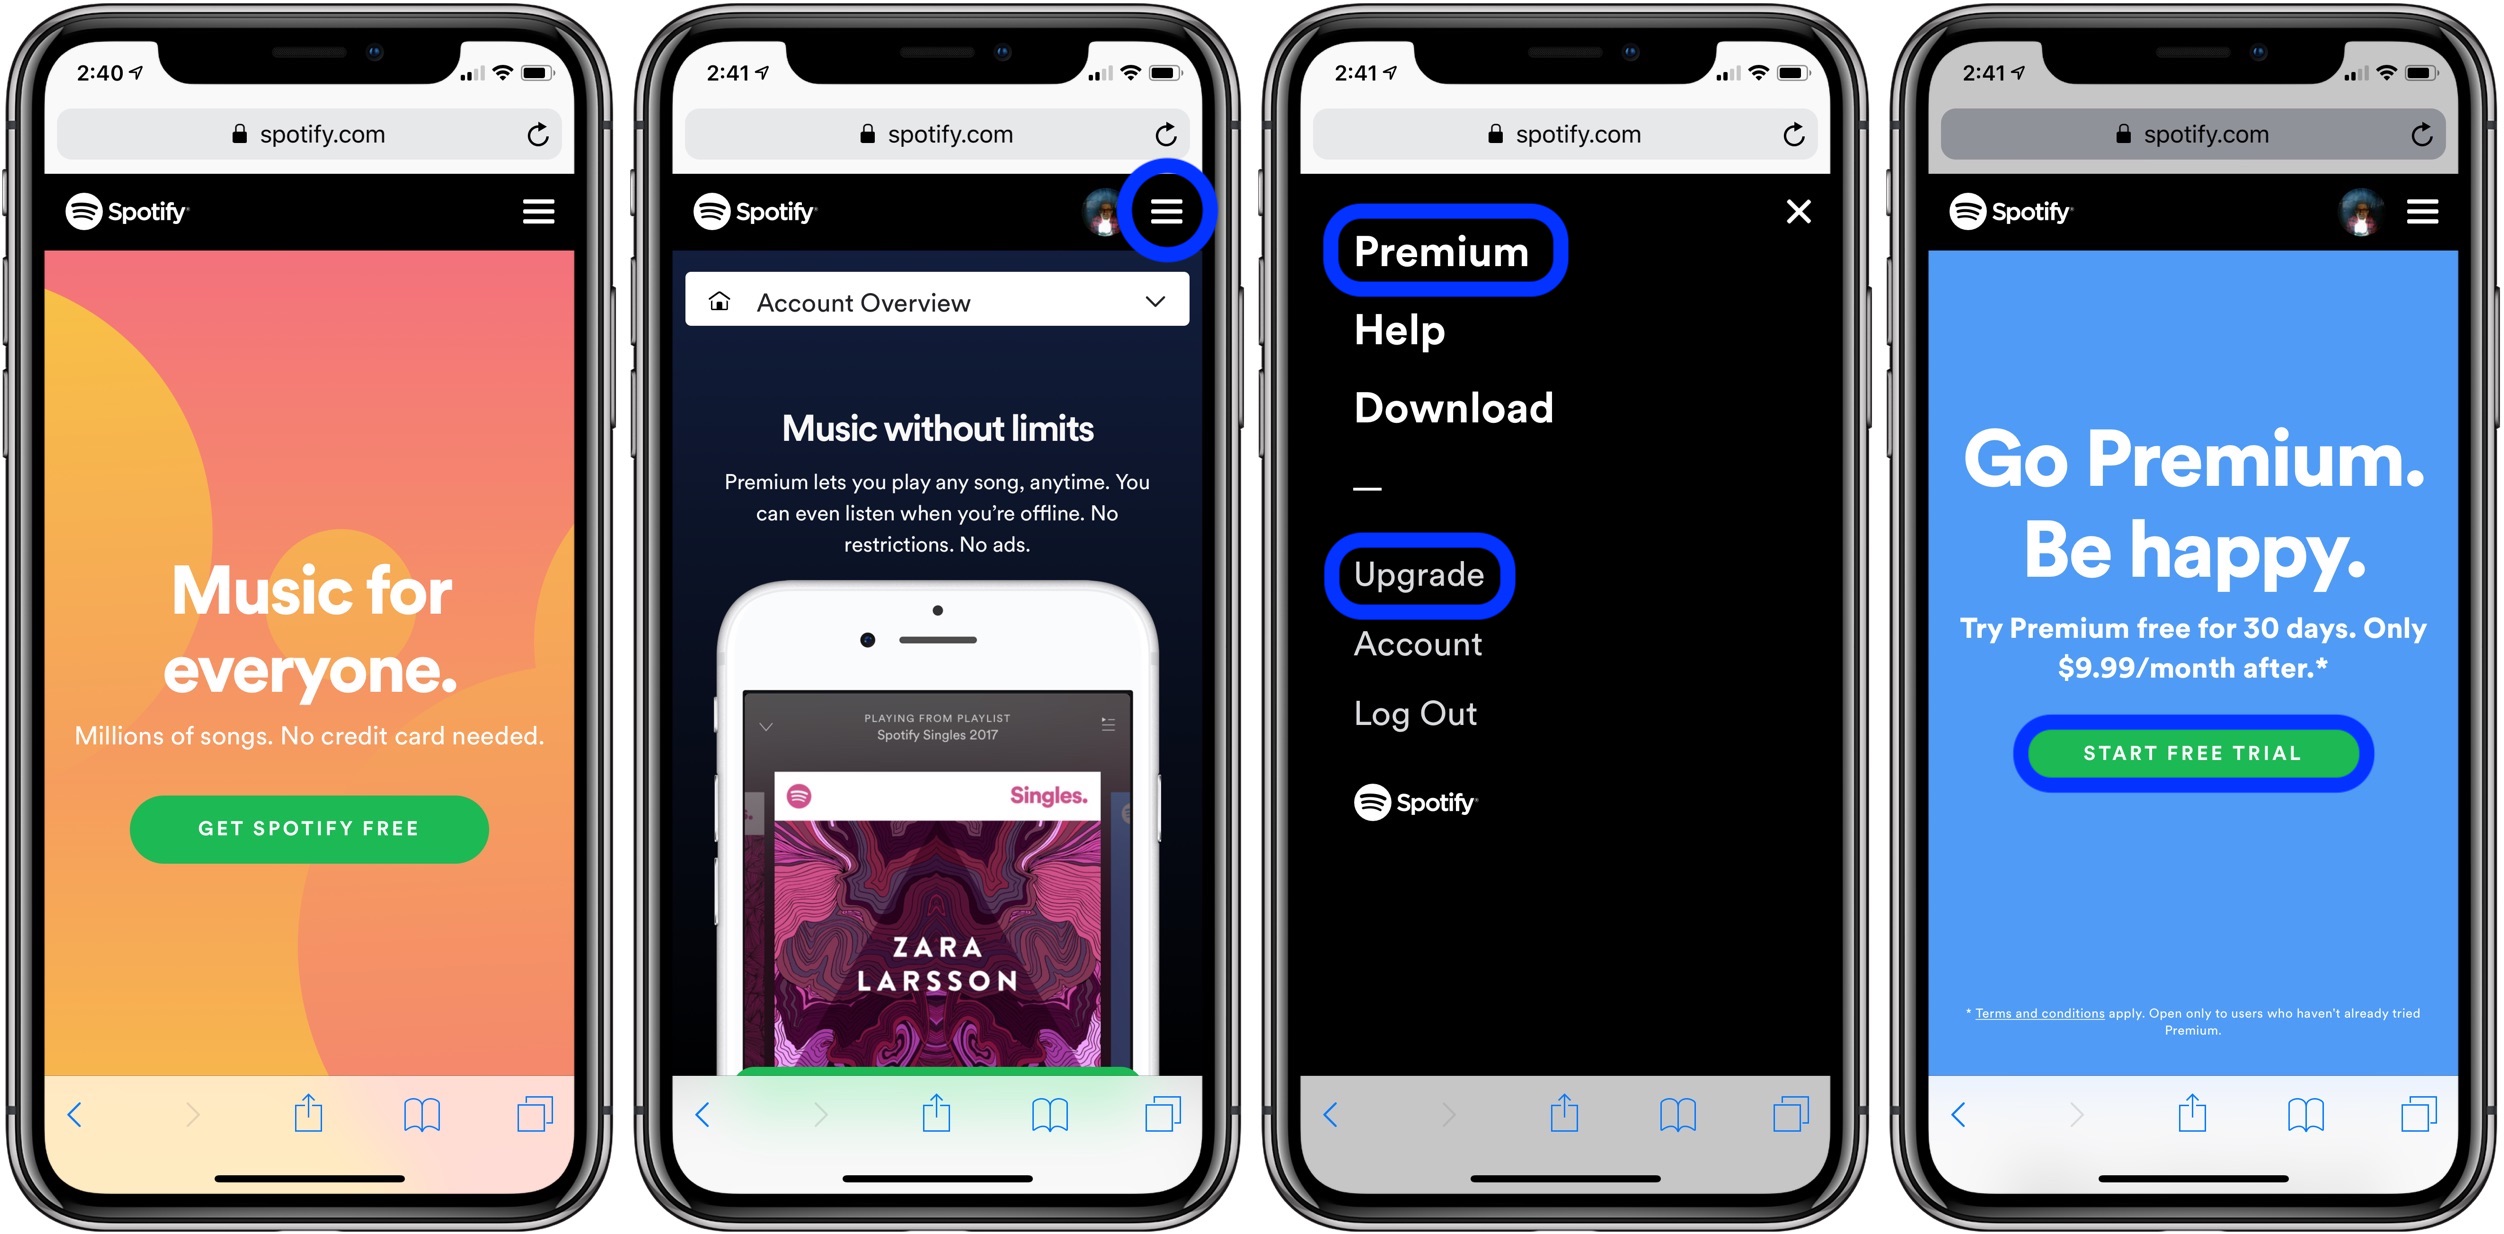 how-to-pay-for-spotify-premium-in-the-app-9to5mac